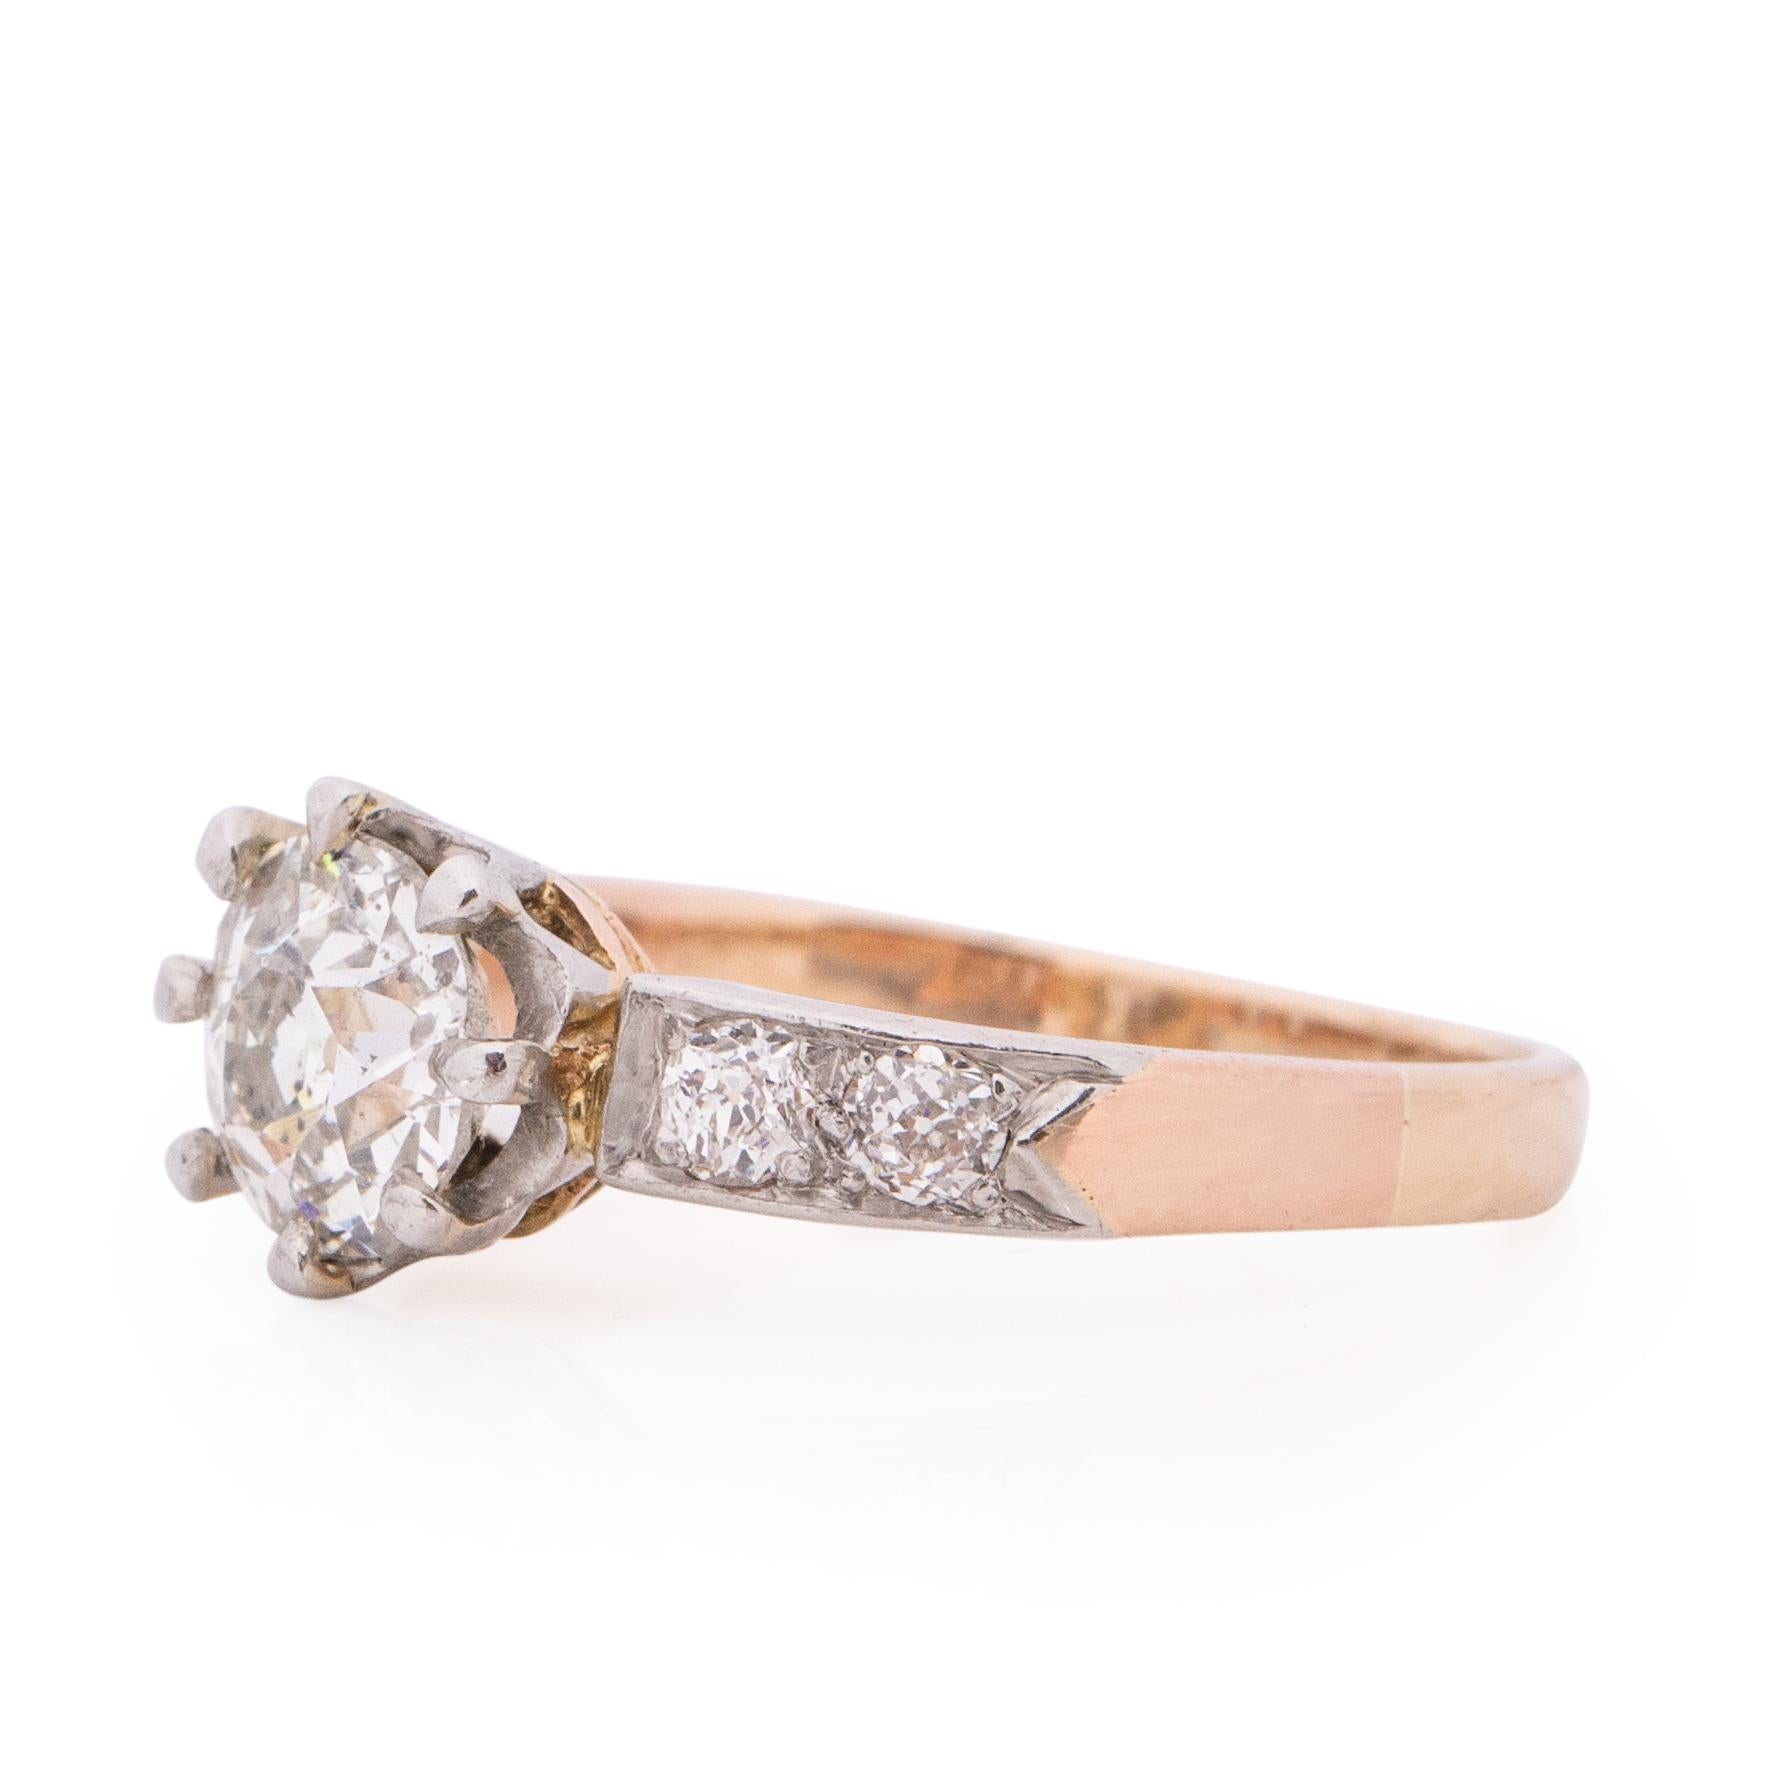 Here we have a two tone beauty. This classic Edwardian solitaire ring has a breath taking 1.25Ct old European cut diamond being held by 14K white gold, accenting the center gem are two old euros on either side also set in white gold. Bringing the